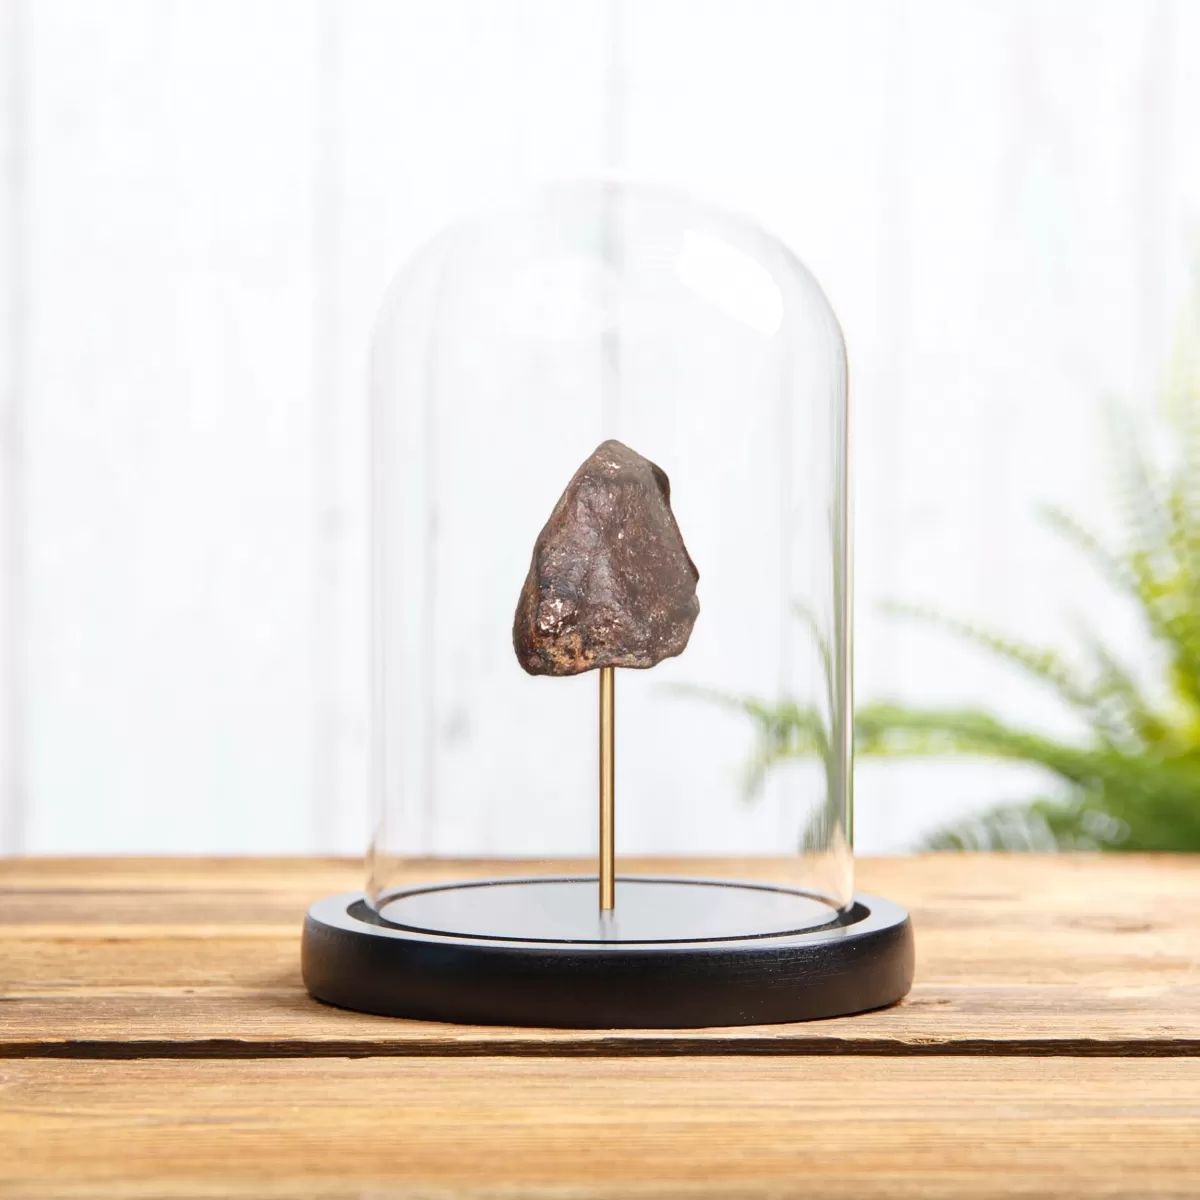 Minibeast Meteorite in Glass Dome with Wooden Base